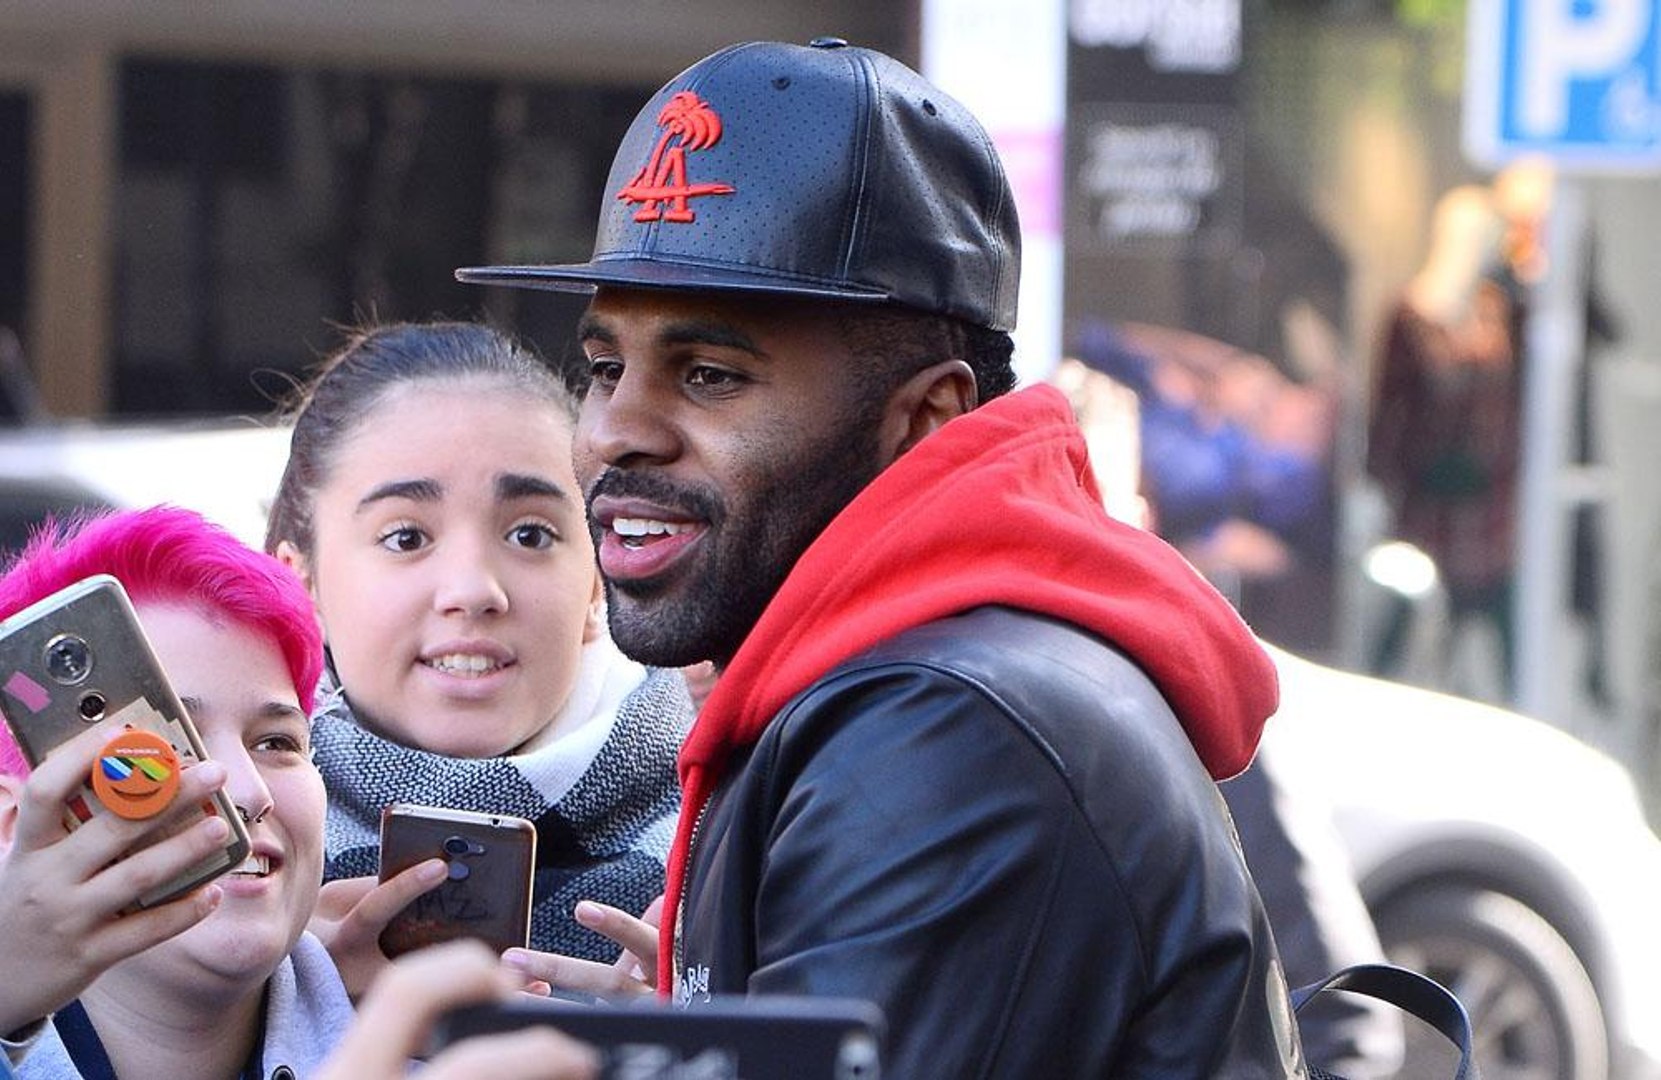 ⁣Jason Derulo tipped to make a 'fortune' as an independent artist